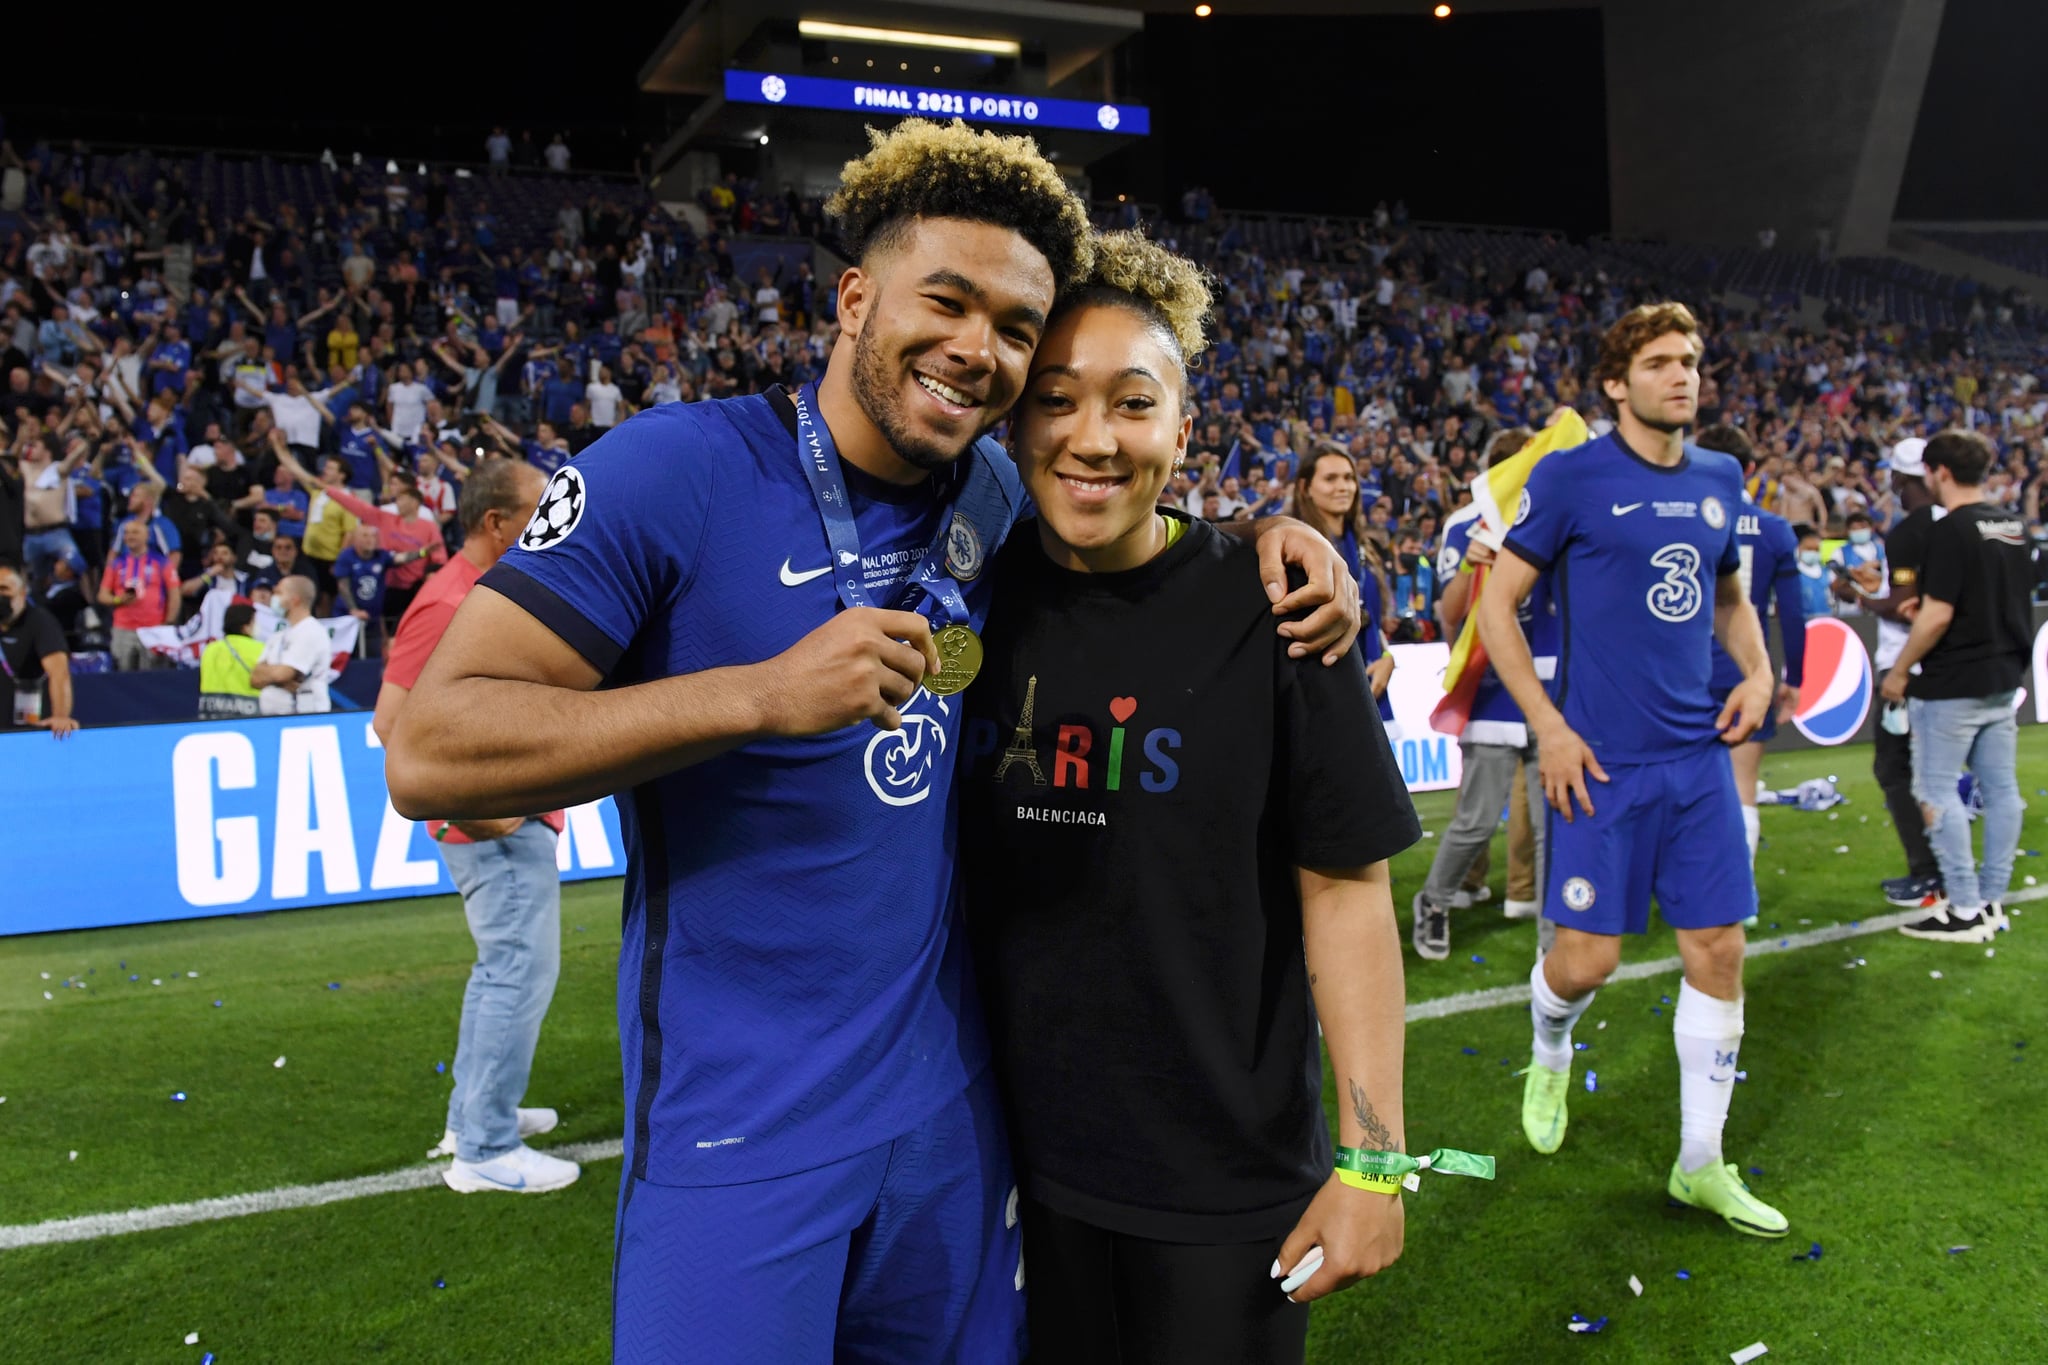 PORTO, PORTUGAL - MAY 29: Reece James of Chelsea celebrates with his Sister, Lauren James following victory in the UEFA Champions League Final between Manchester City and Chelsea FC at Estadio do Dragao on May 29, 2021 in Porto, Portugal. (Photo by Alex Caparros - UEFA/UEFA via Getty Images)